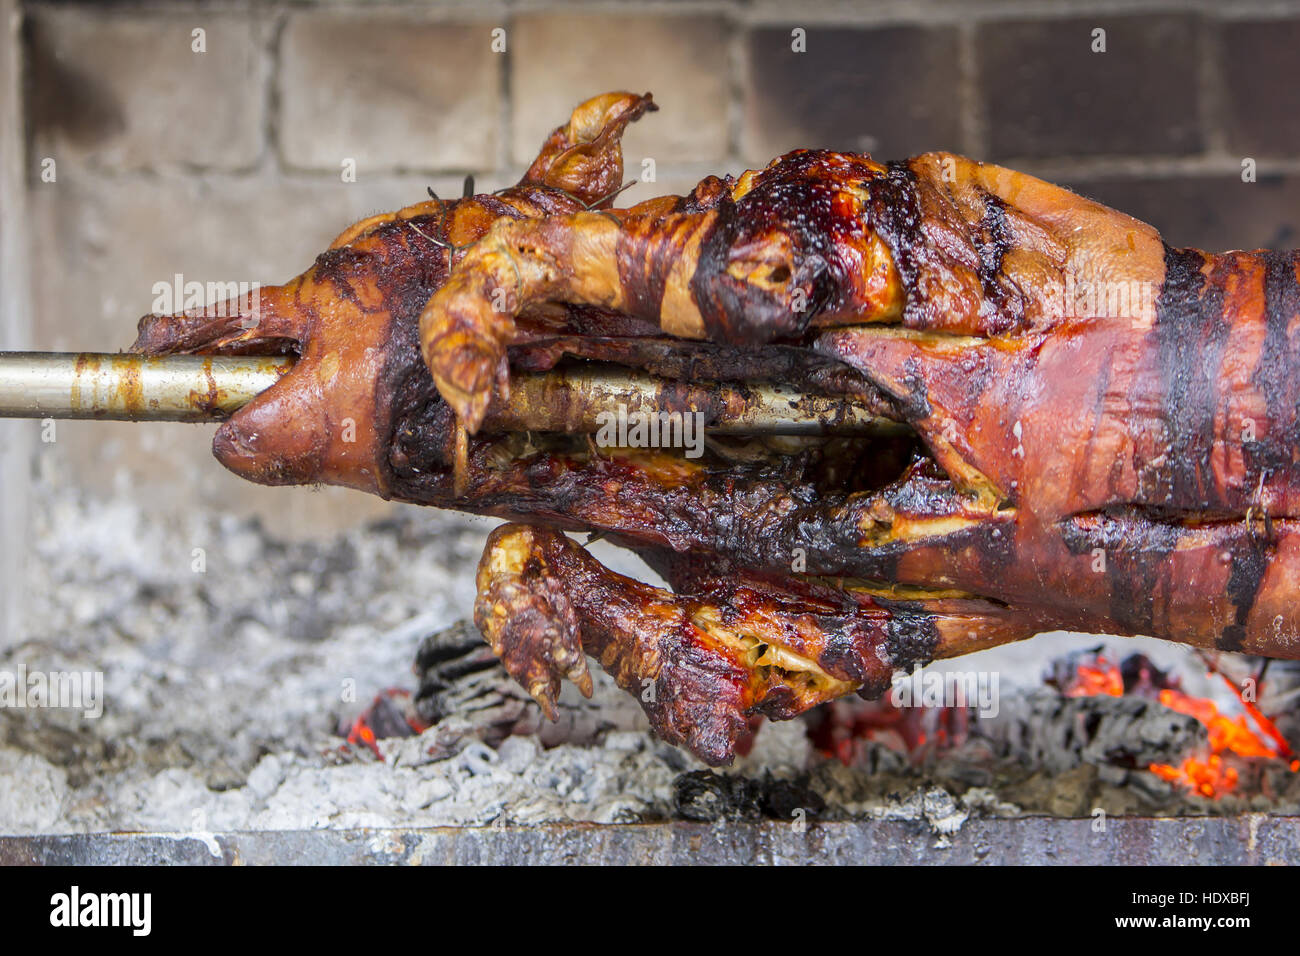 Roasting suckling pig on the broach Stock Photo